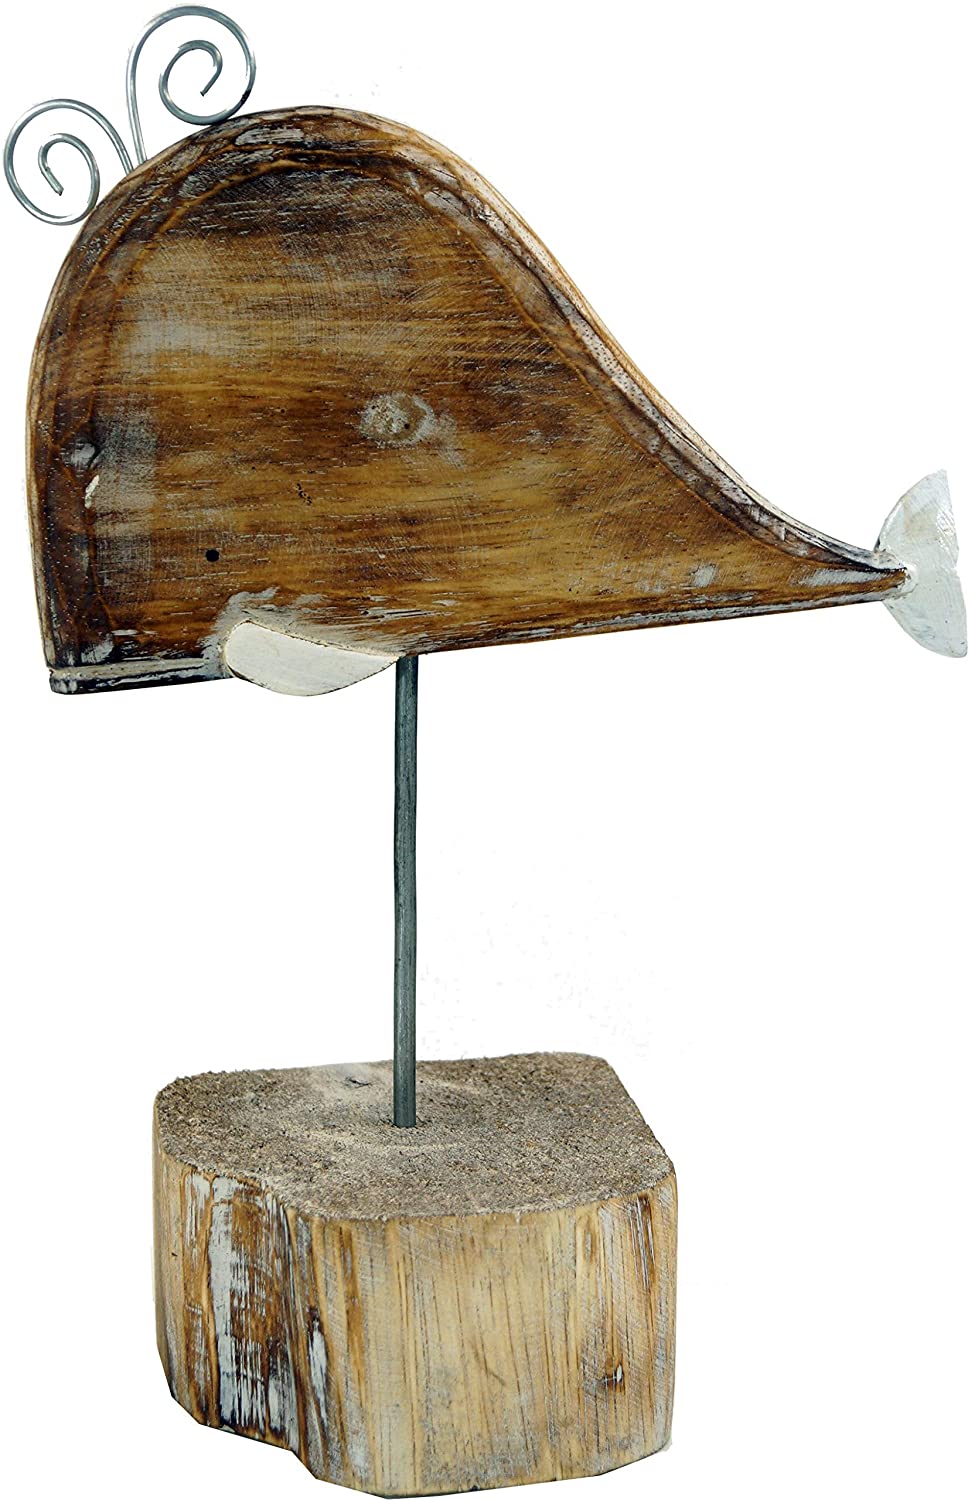 Guru-Shop Carved Wooden Figurine Whale, Moby Dick 2, On Wooden Metal Stand,